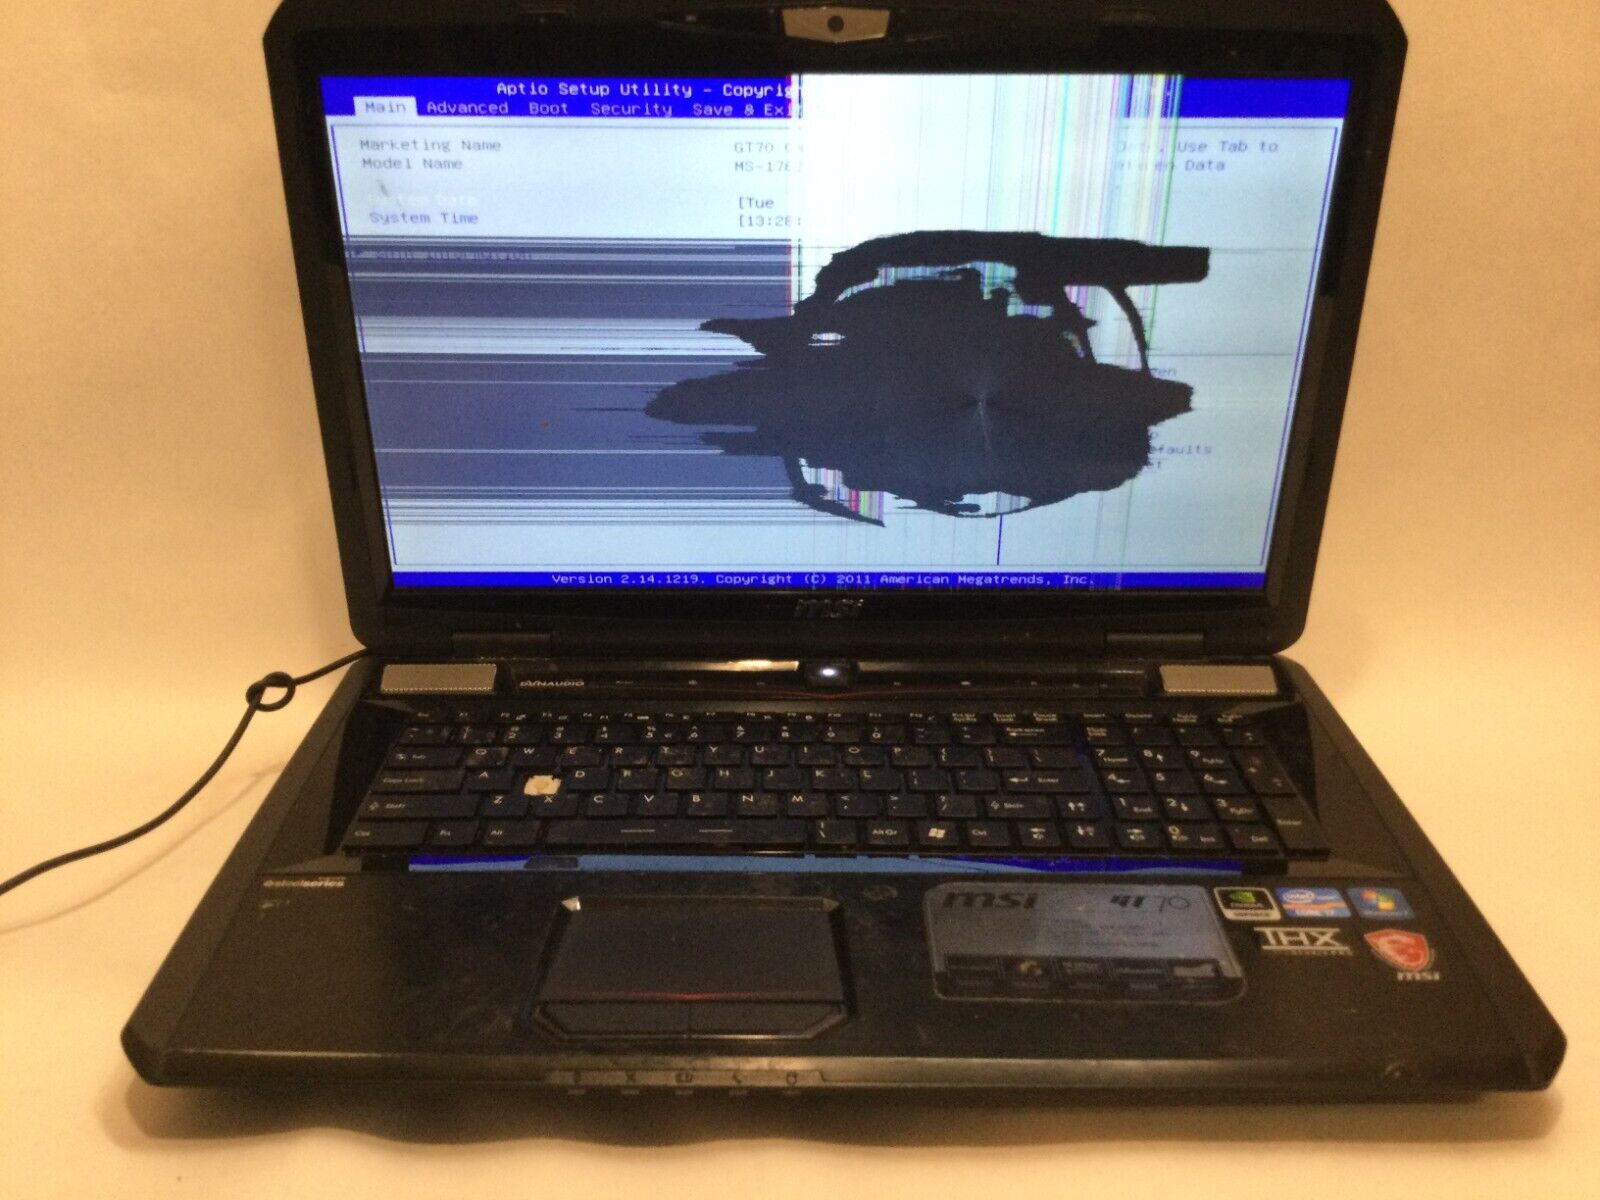 MSI GT70 Dominator MS-1762 / Intel Xeon E3-1505M v5 / (CRACKED/MISSING PARTS) MR